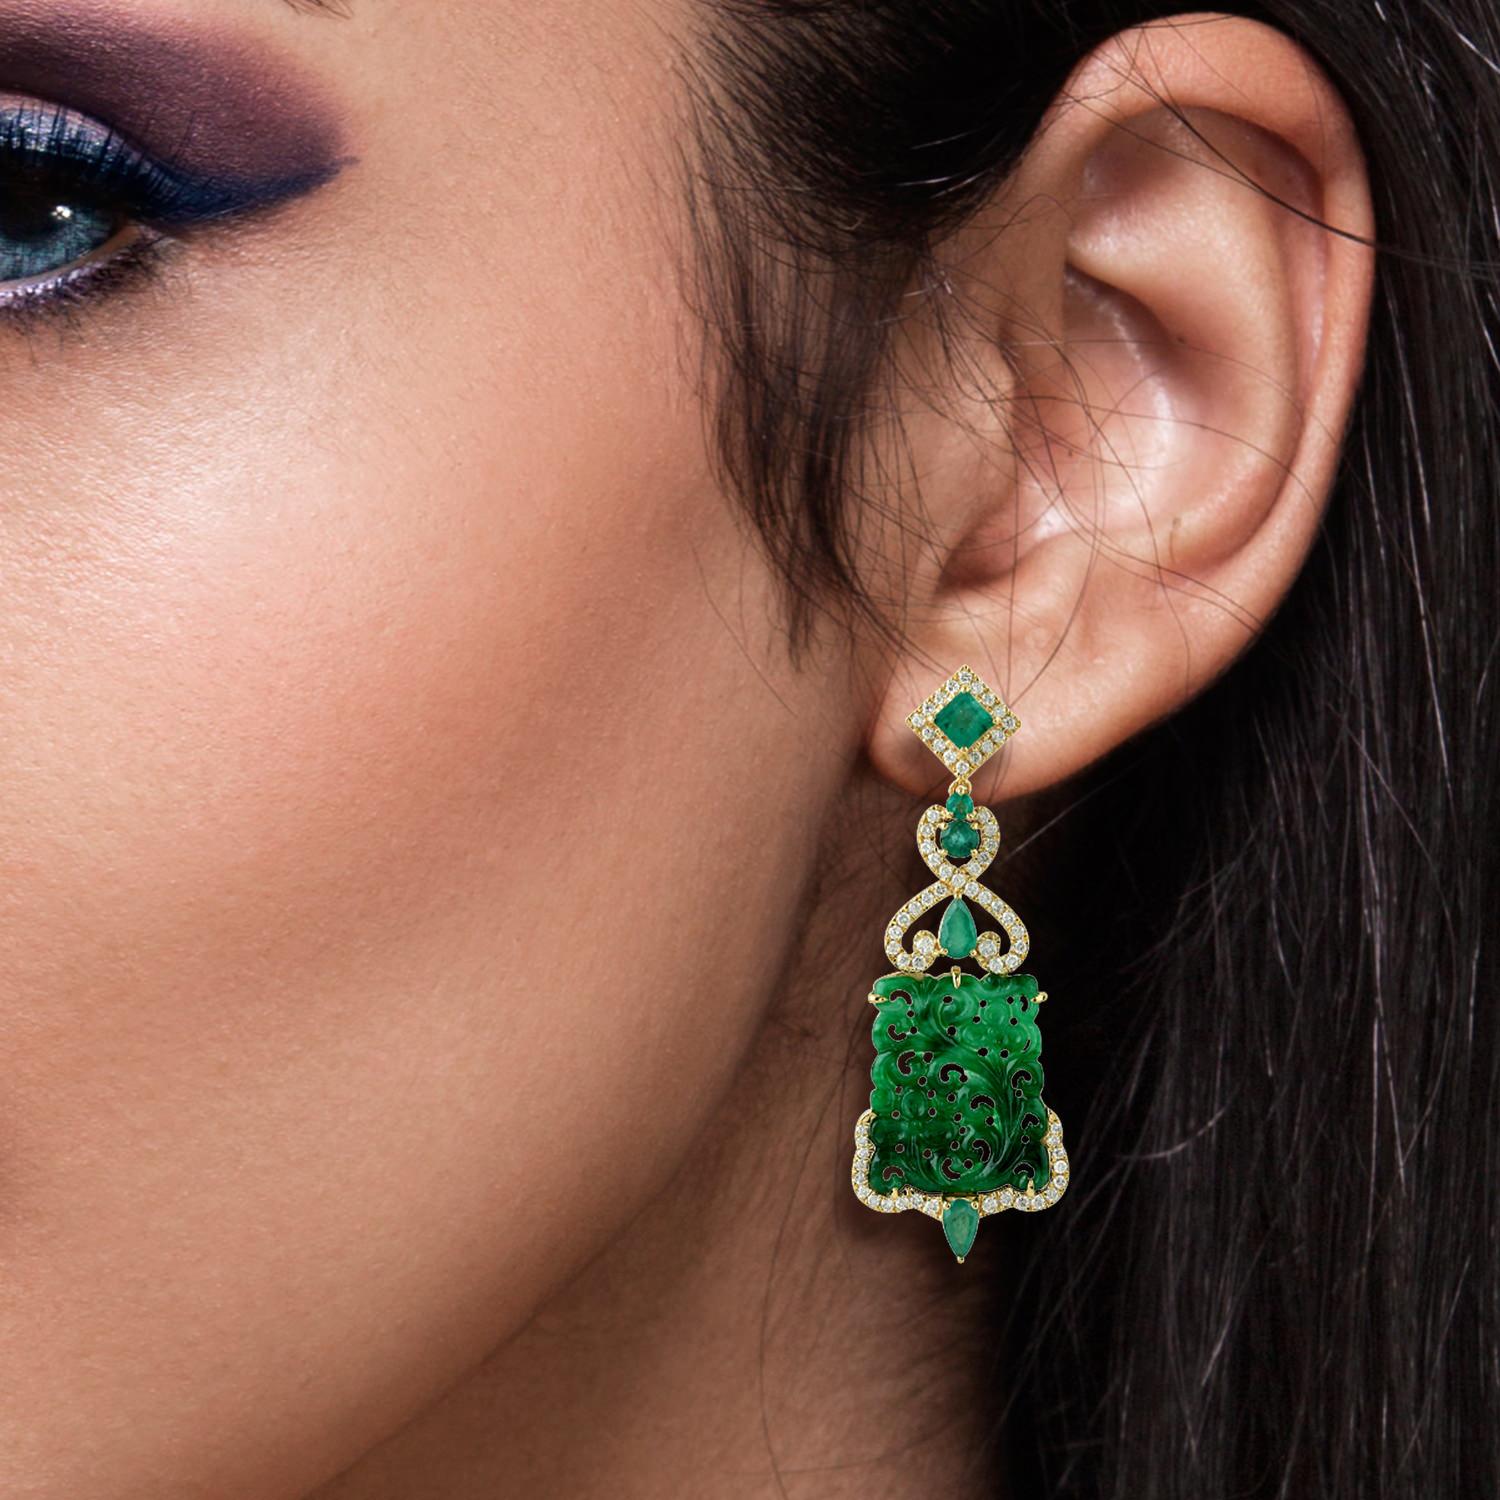 These stunning hand carved Jade earrings are crafted in 18-karat gold. It is set in 9.66 carats Jade, 1.89 carats emerald and .93 carats of sparkling diamonds.

FOLLOW  MEGHNA JEWELS storefront to view the latest collection & exclusive pieces. 